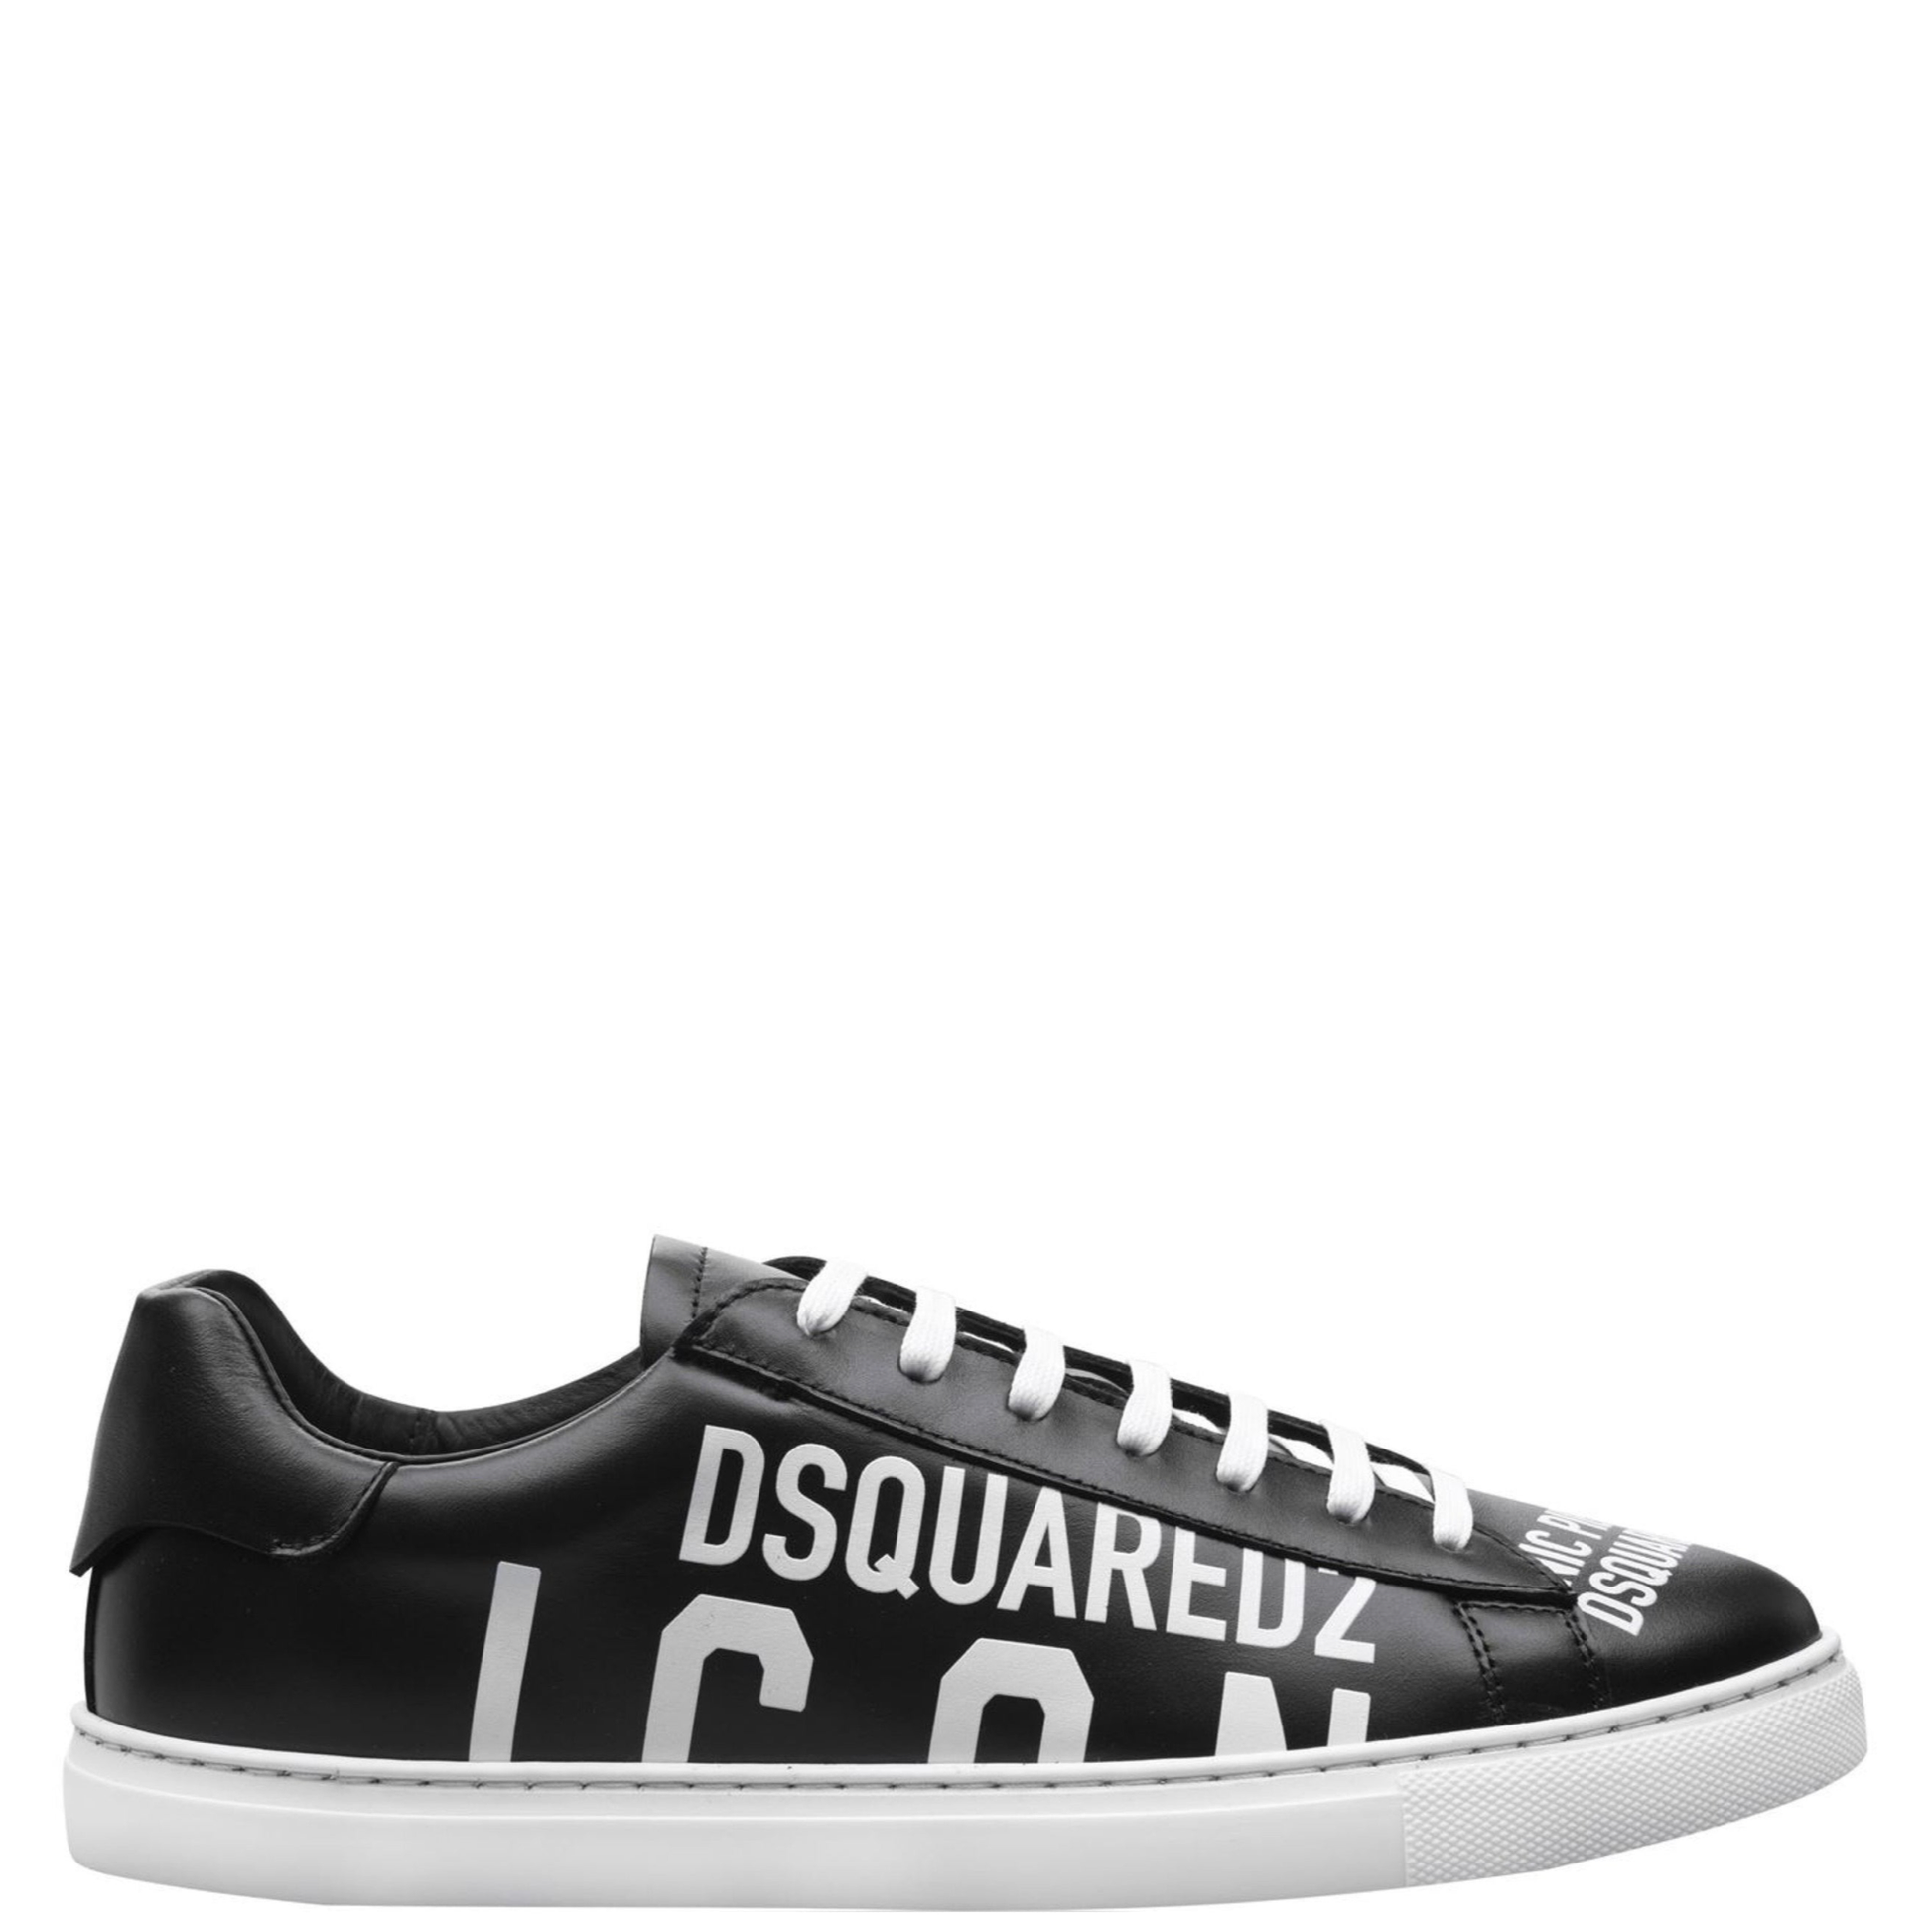 DSQUARED2 Black ICON Trainers - DANYOUNGUK